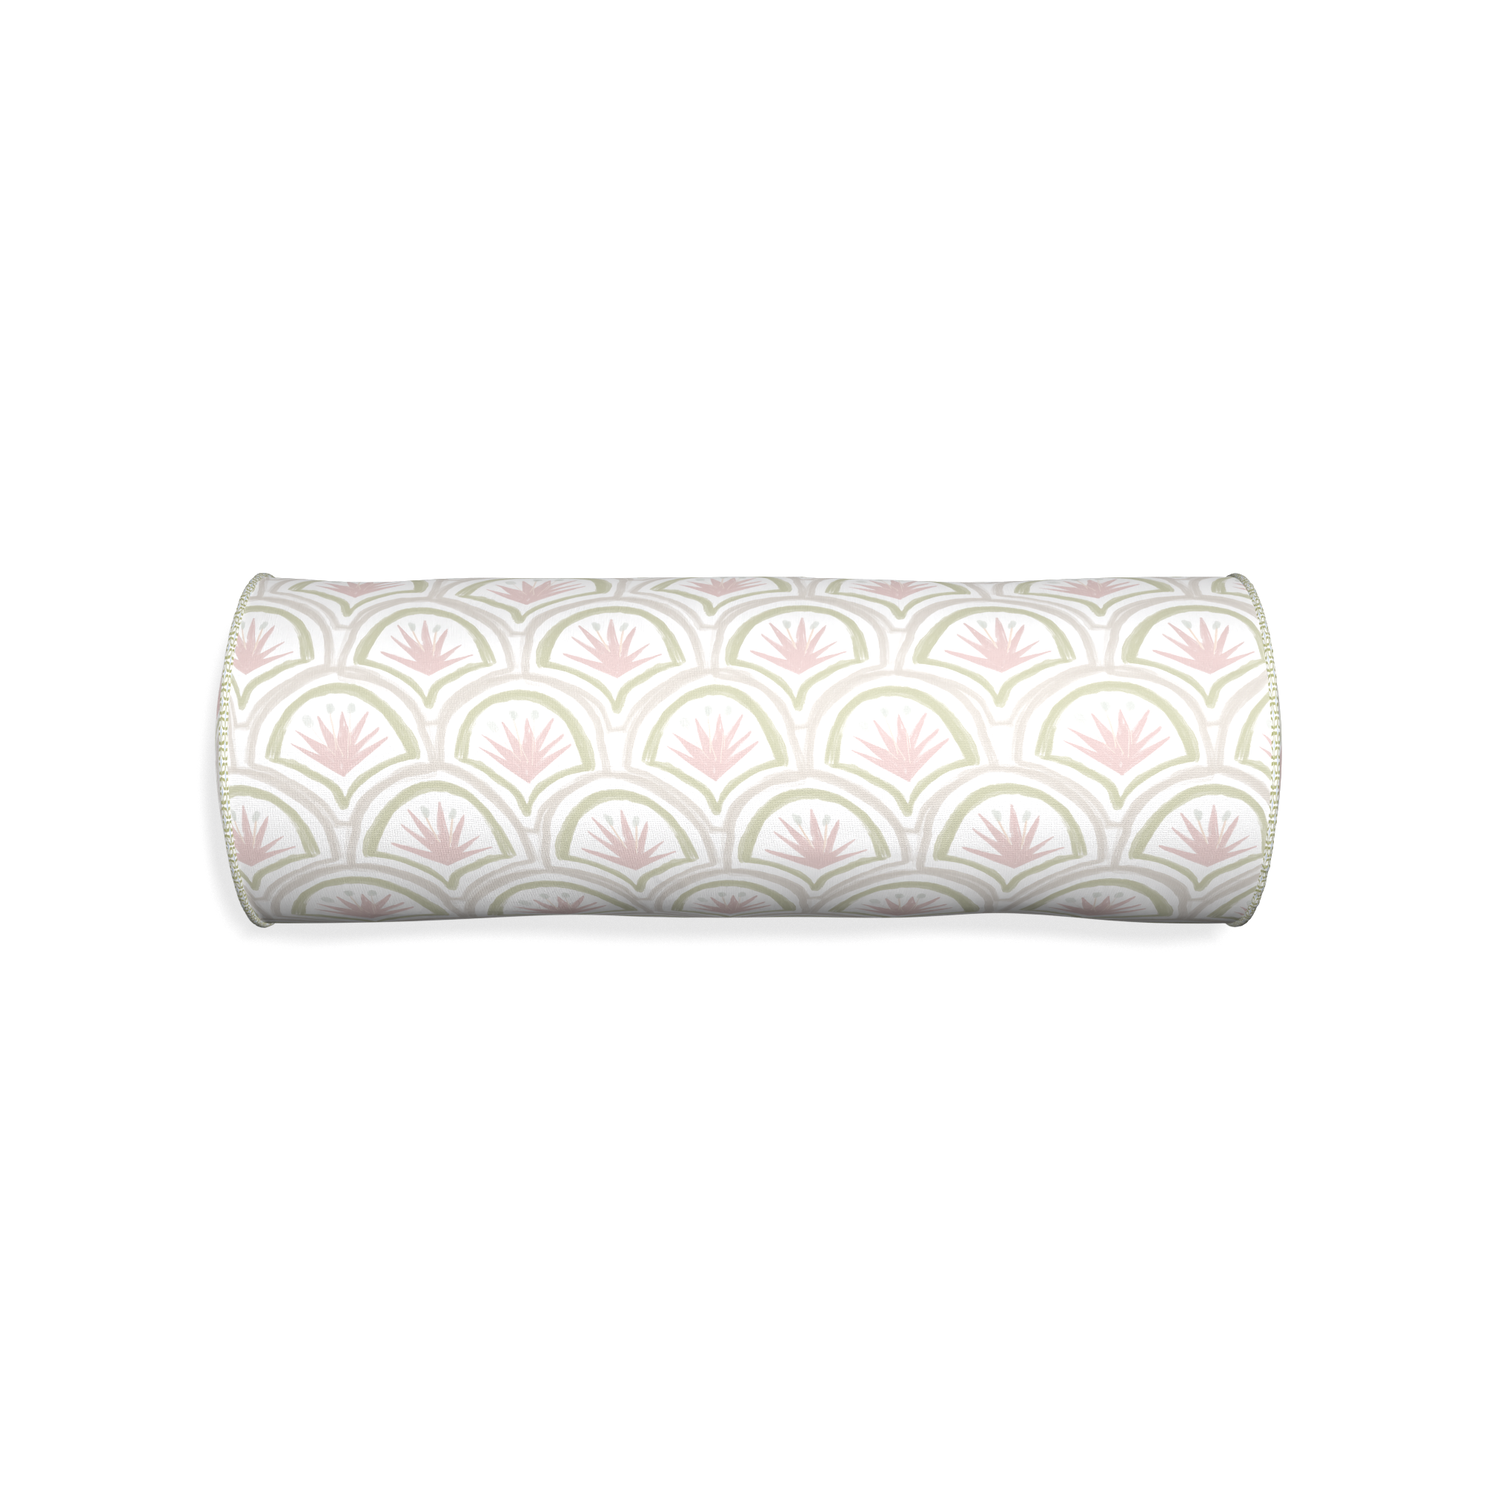 Bolster thatcher rose custom pillow with l piping on white background